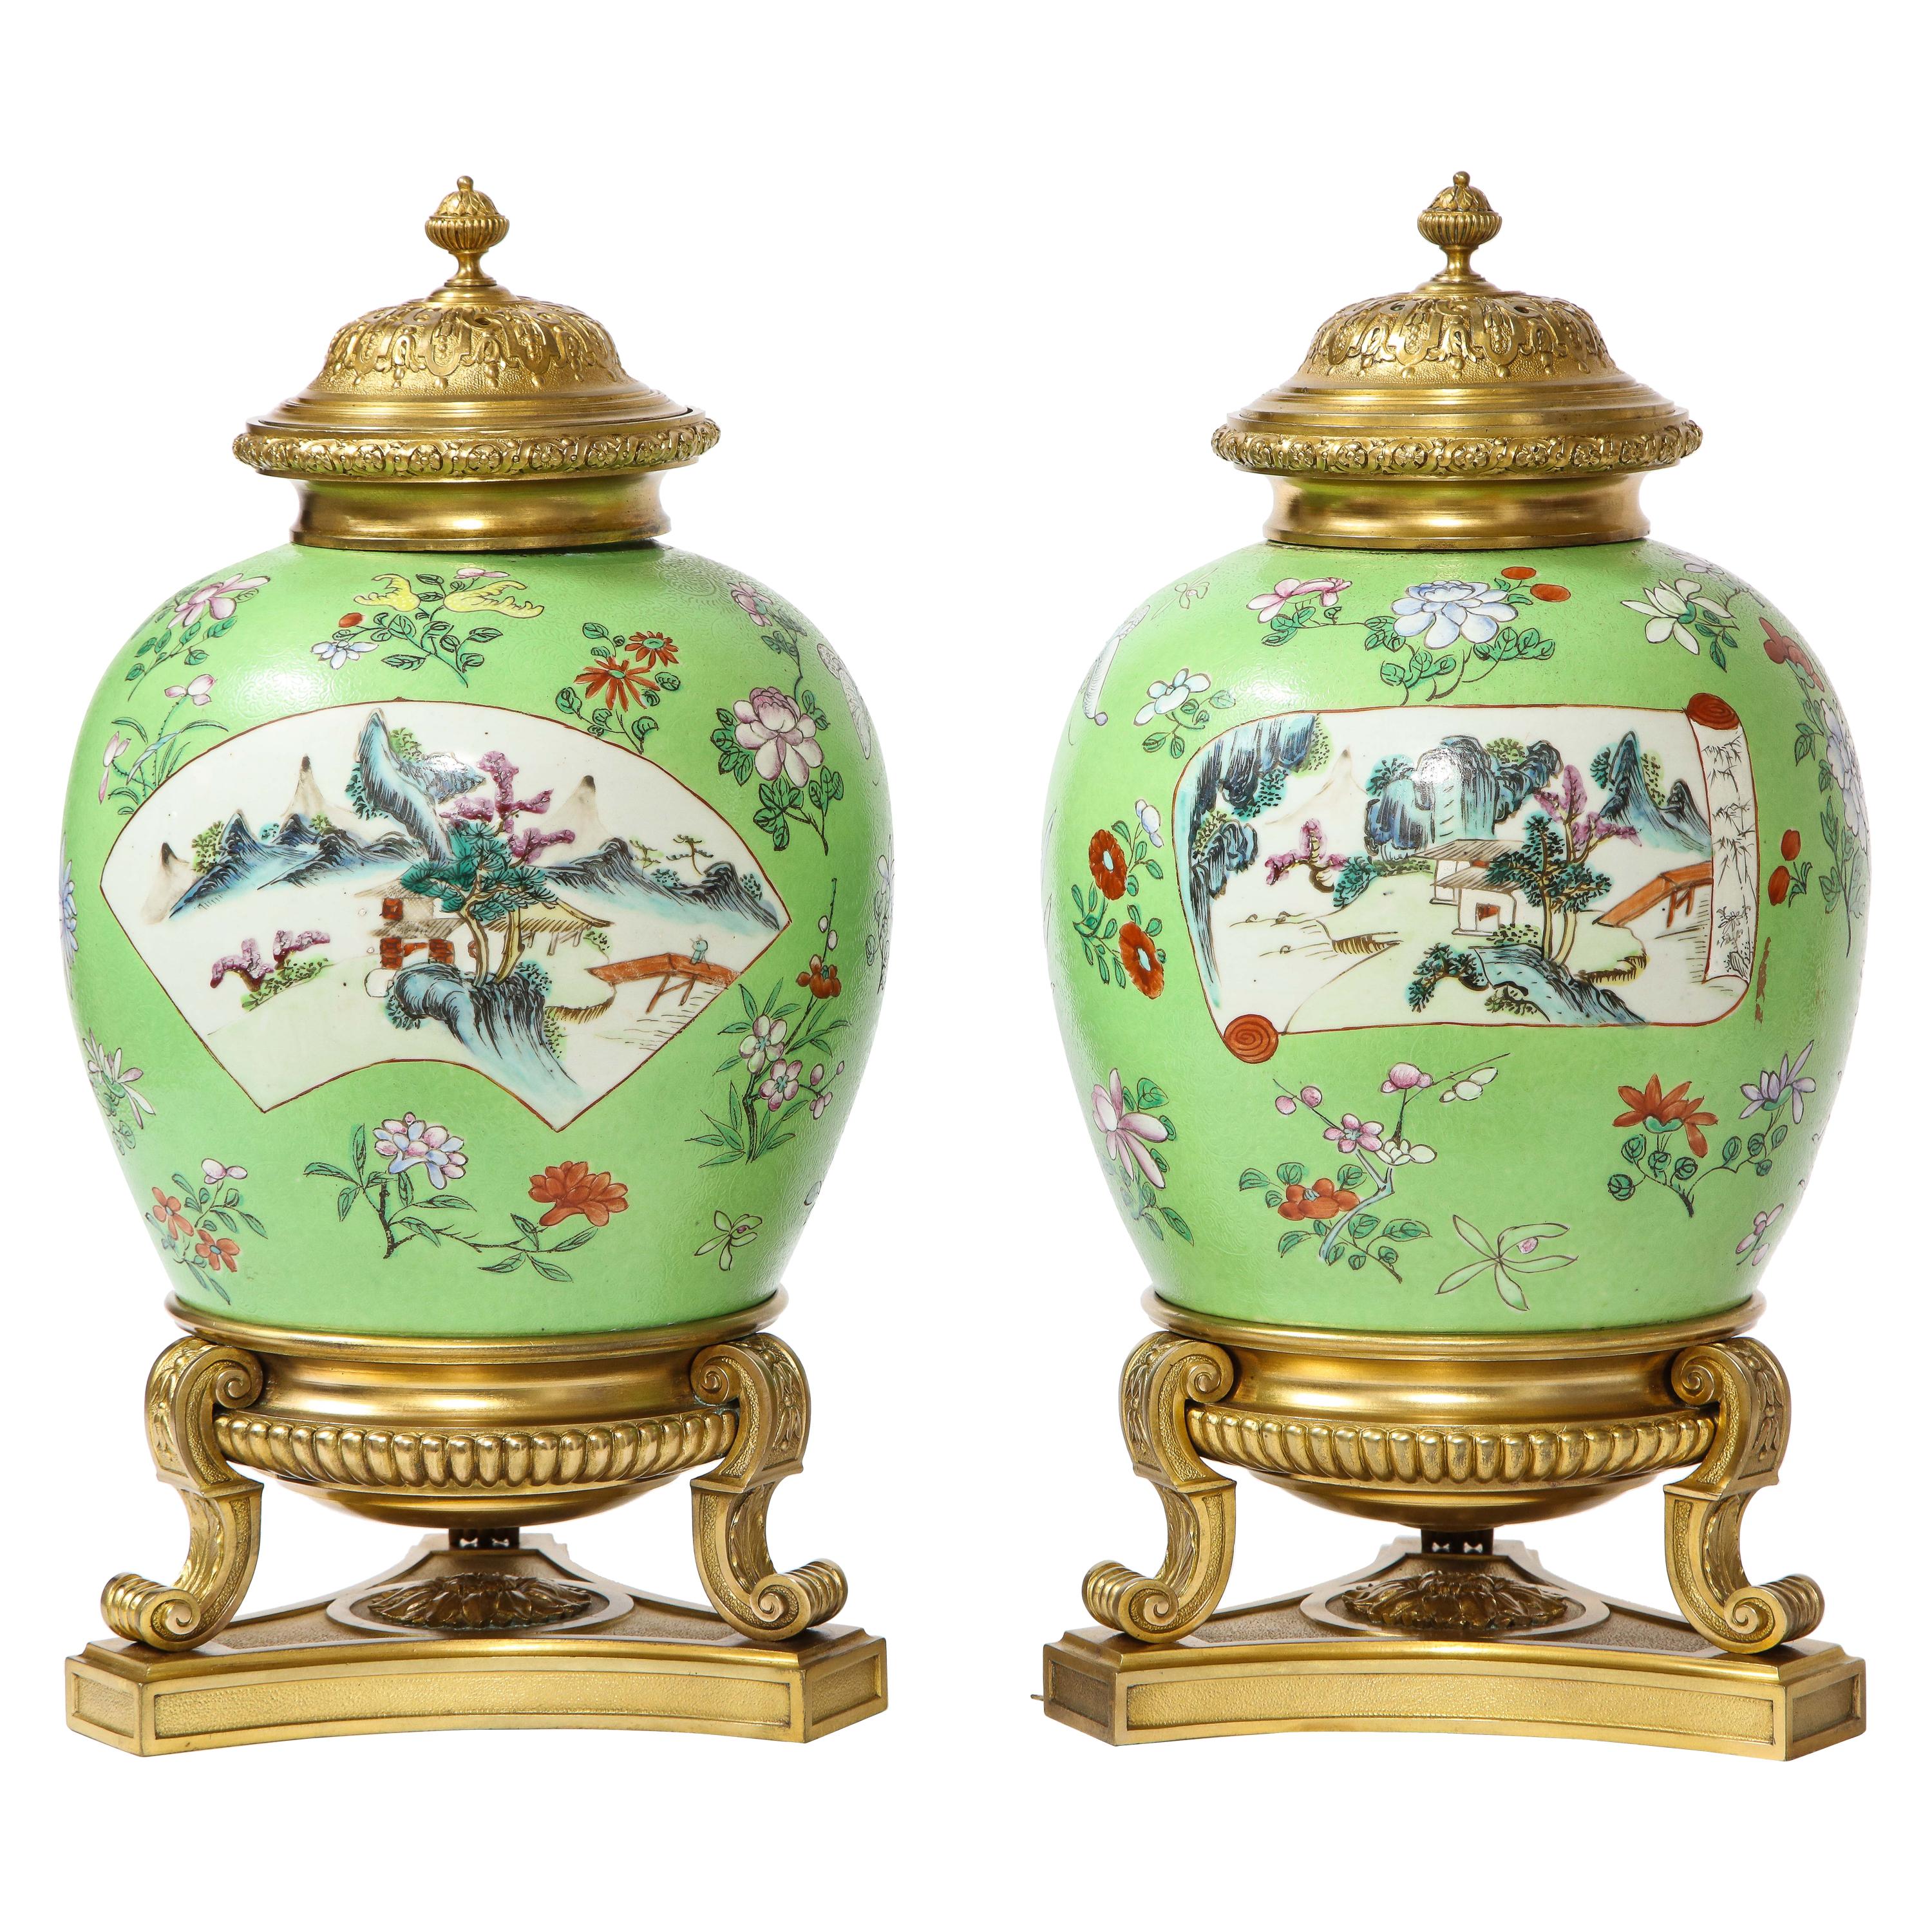 Pair of Dore Bronze Mounted Chinese Famille Rose Porcelain Vases